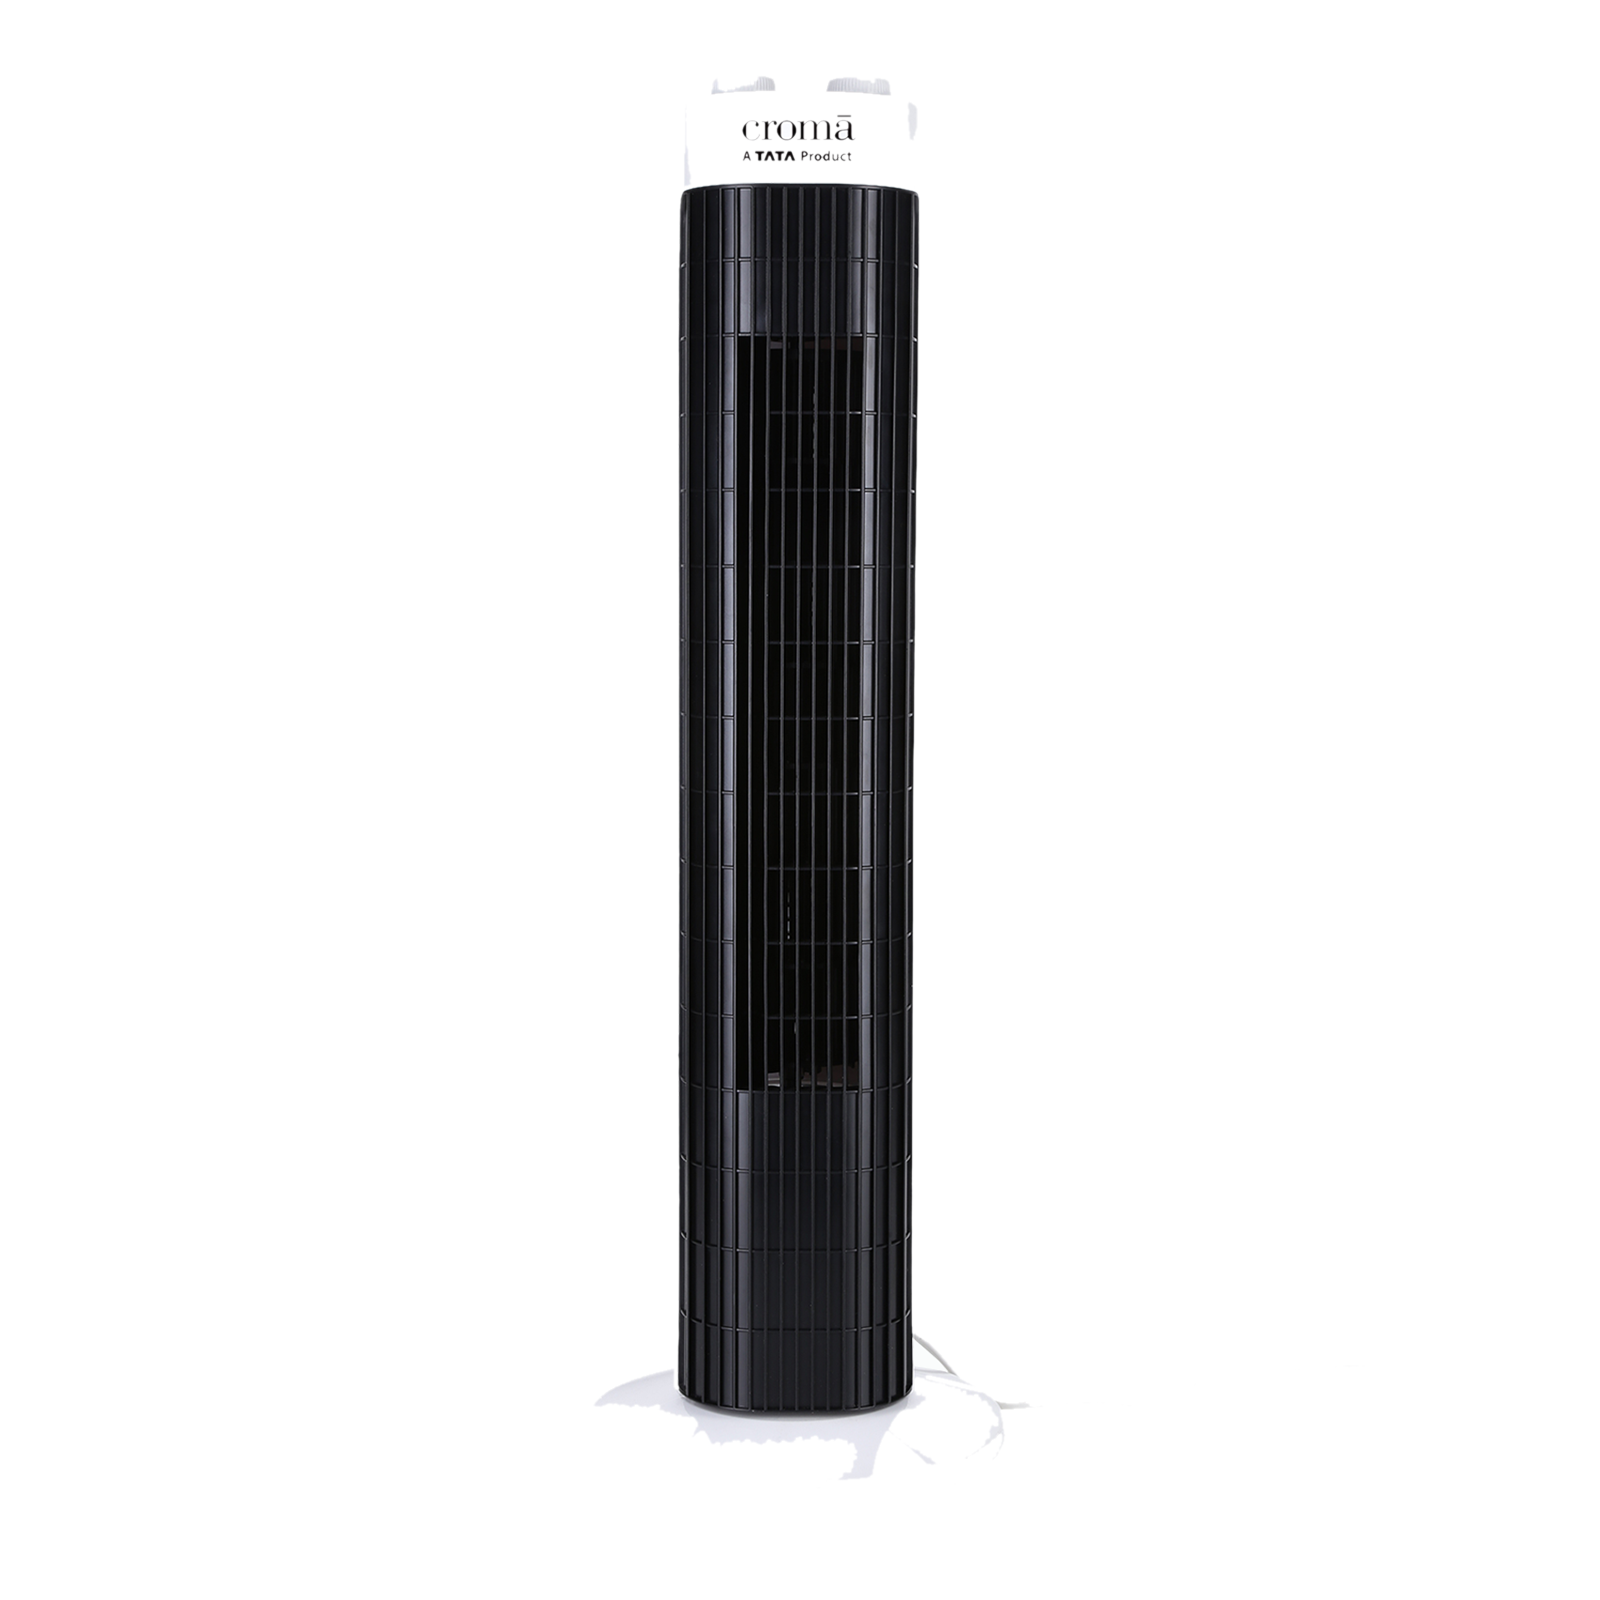 Croma Bladeless 540 m3/hr Air Delivery Tower Fan (100% Copper Motor, White & Black)